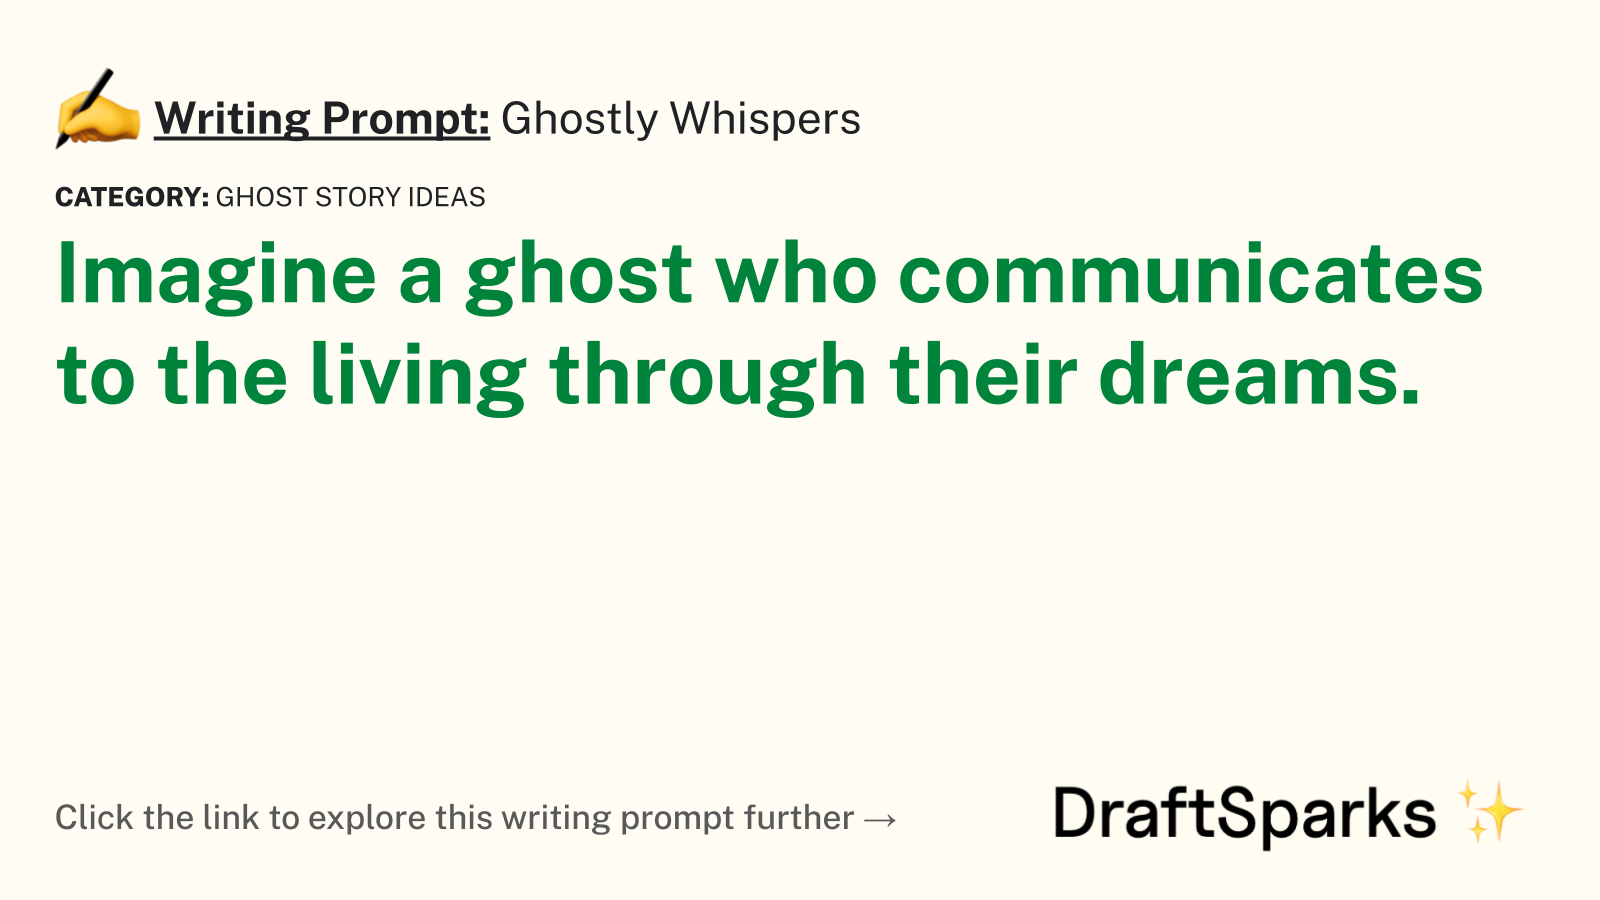 Ghostly Whispers